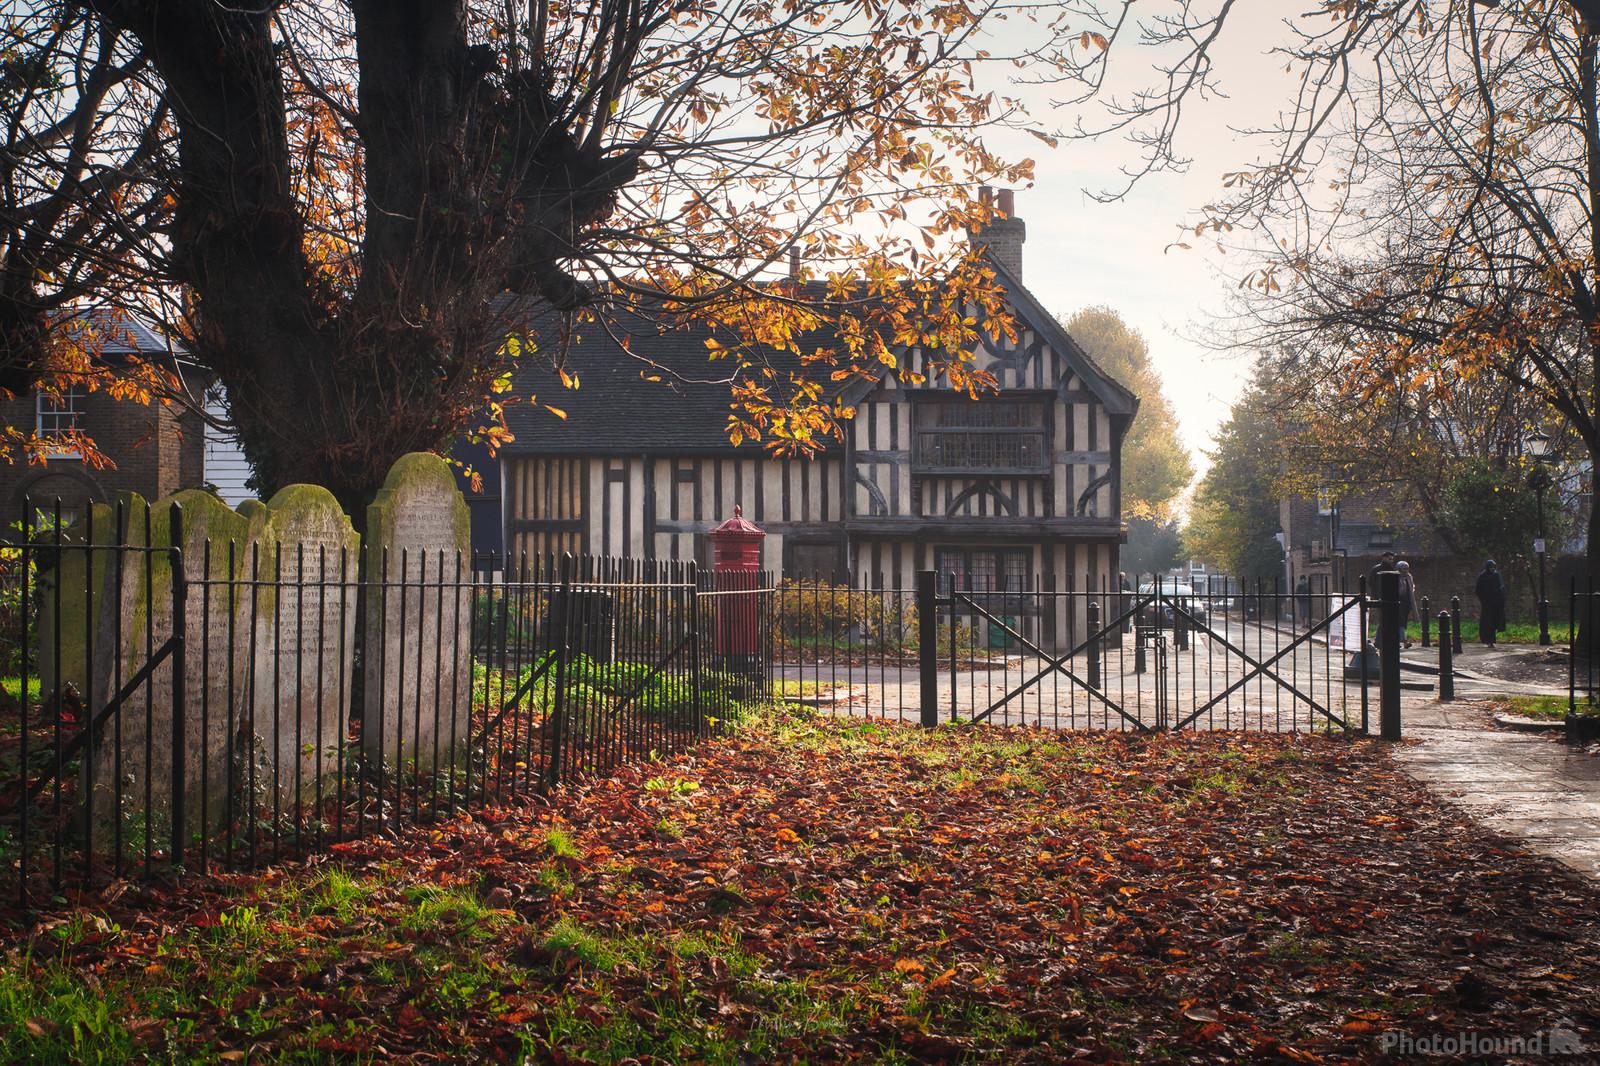 Image of The Ancient House, Walthamstow Village by Mathew Browne